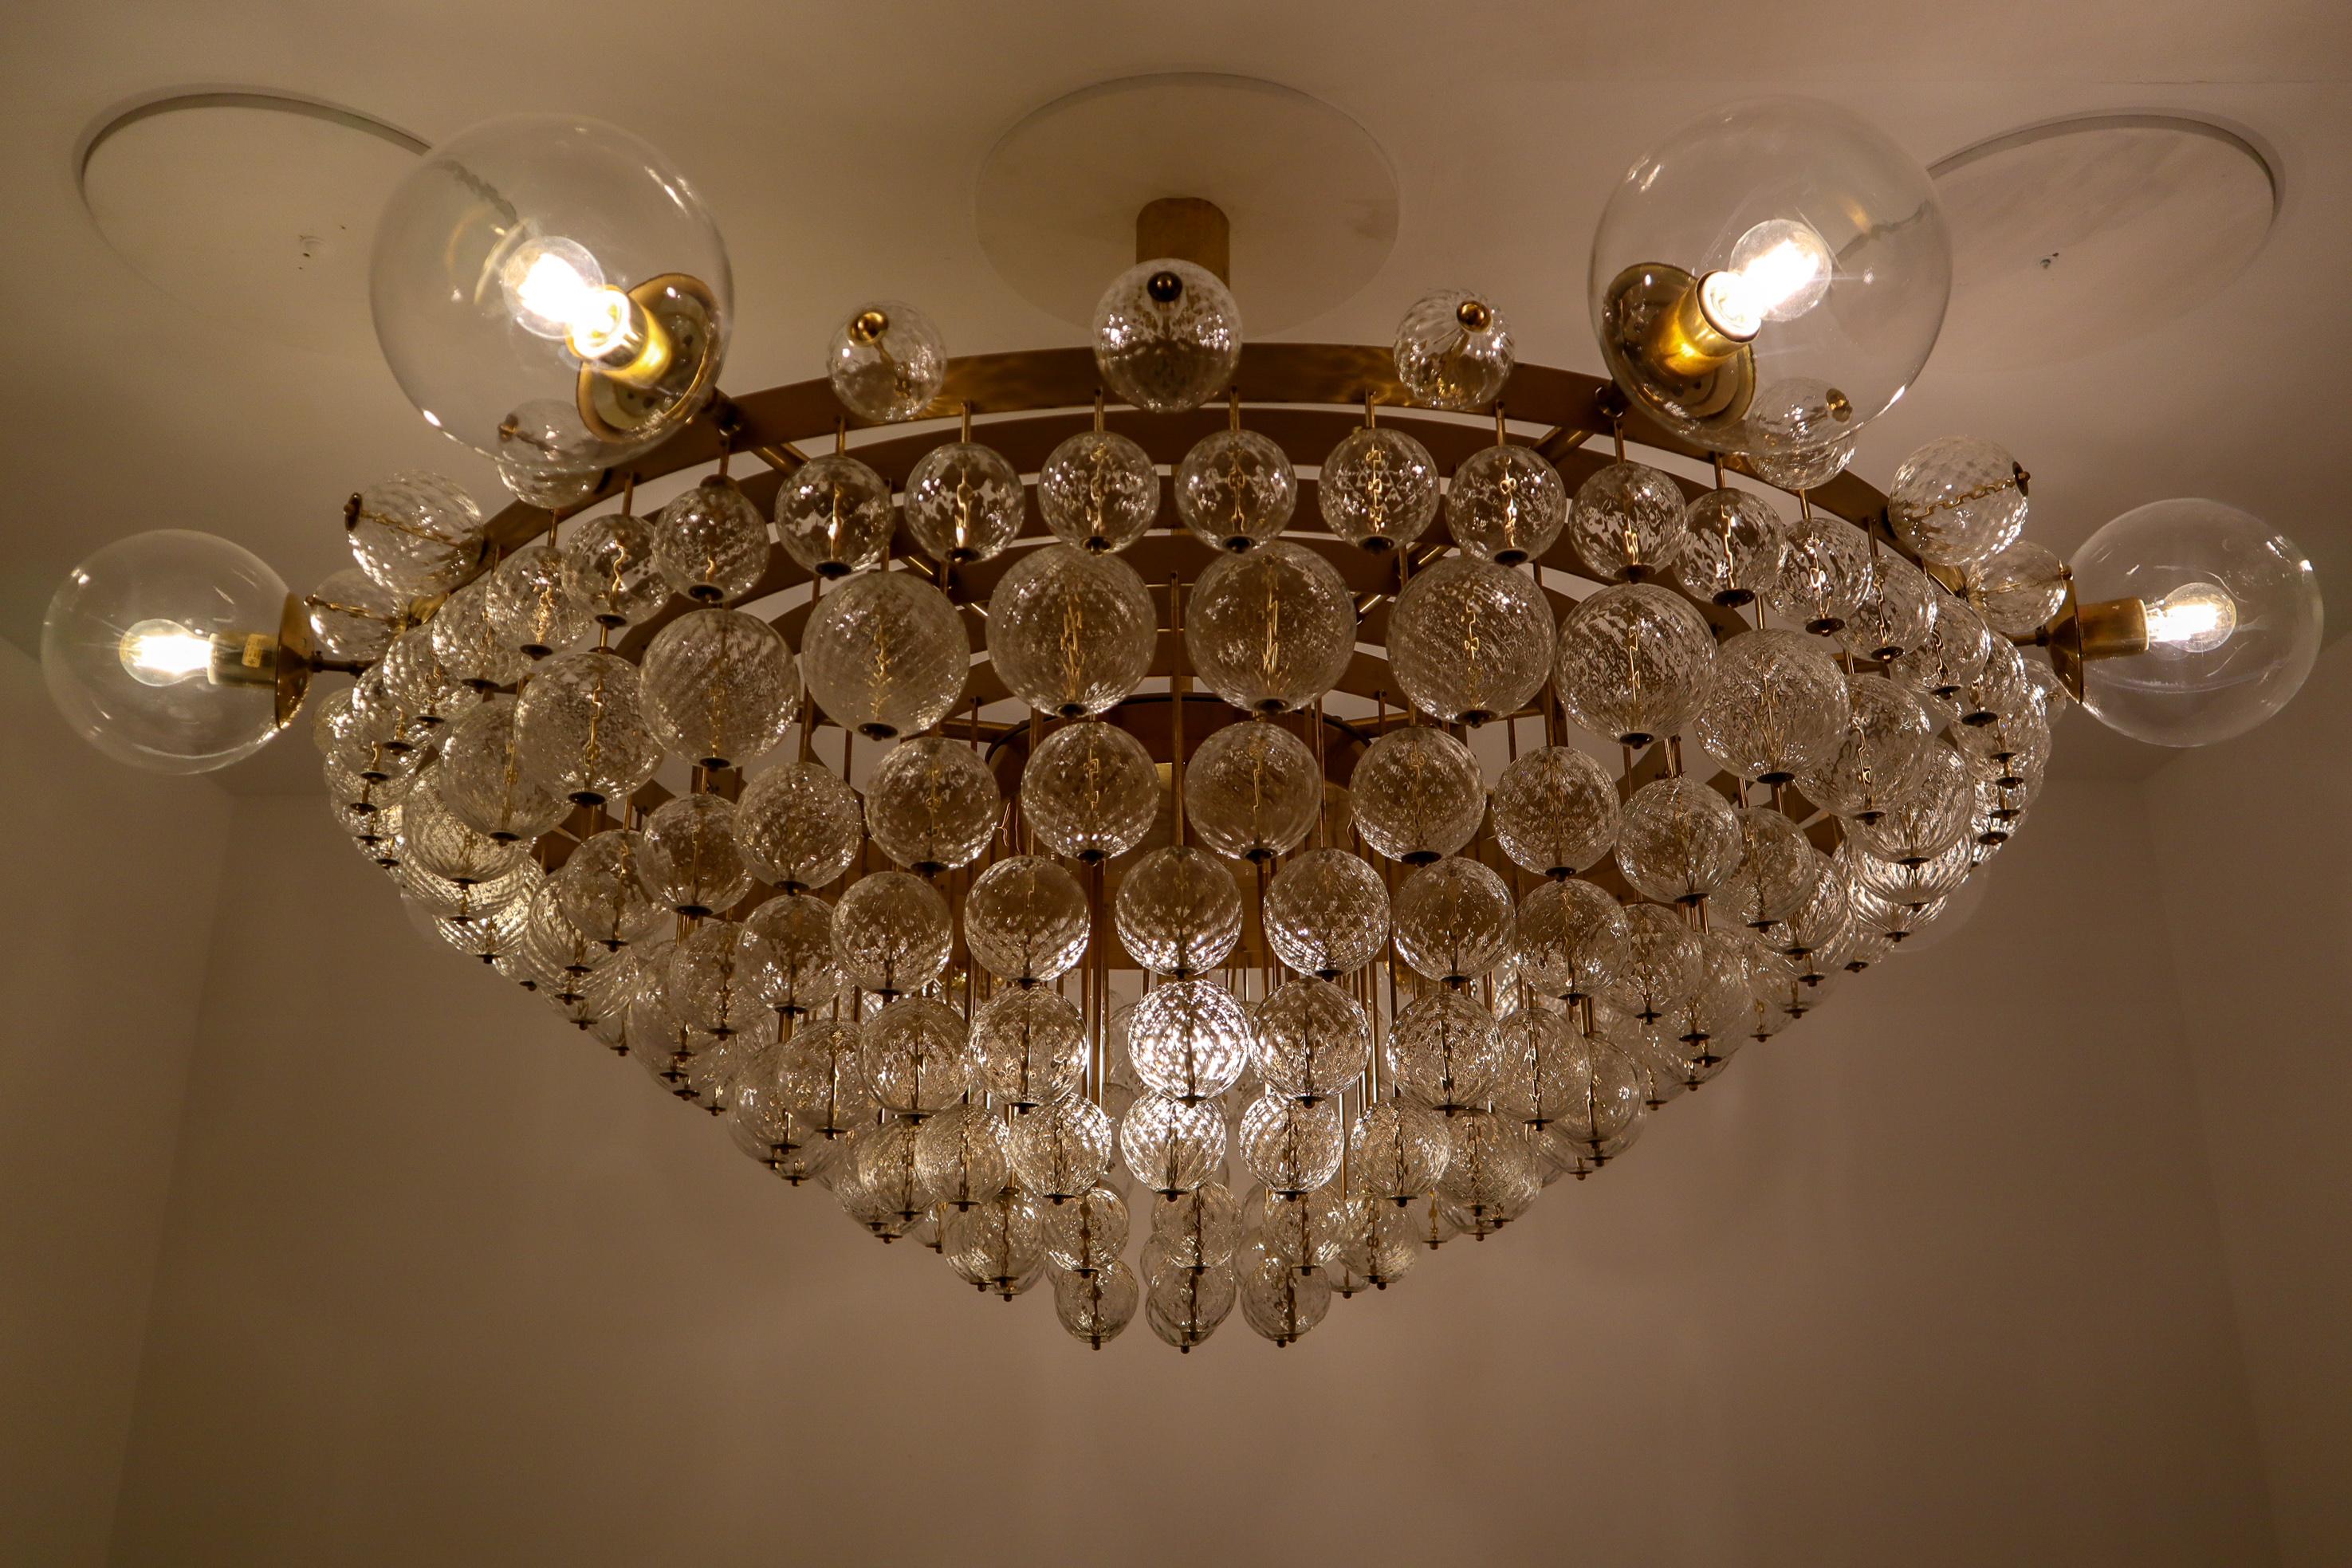 Extremely Large Hotel Chandelier with Brass Fixture and Structured Glass Globes 1